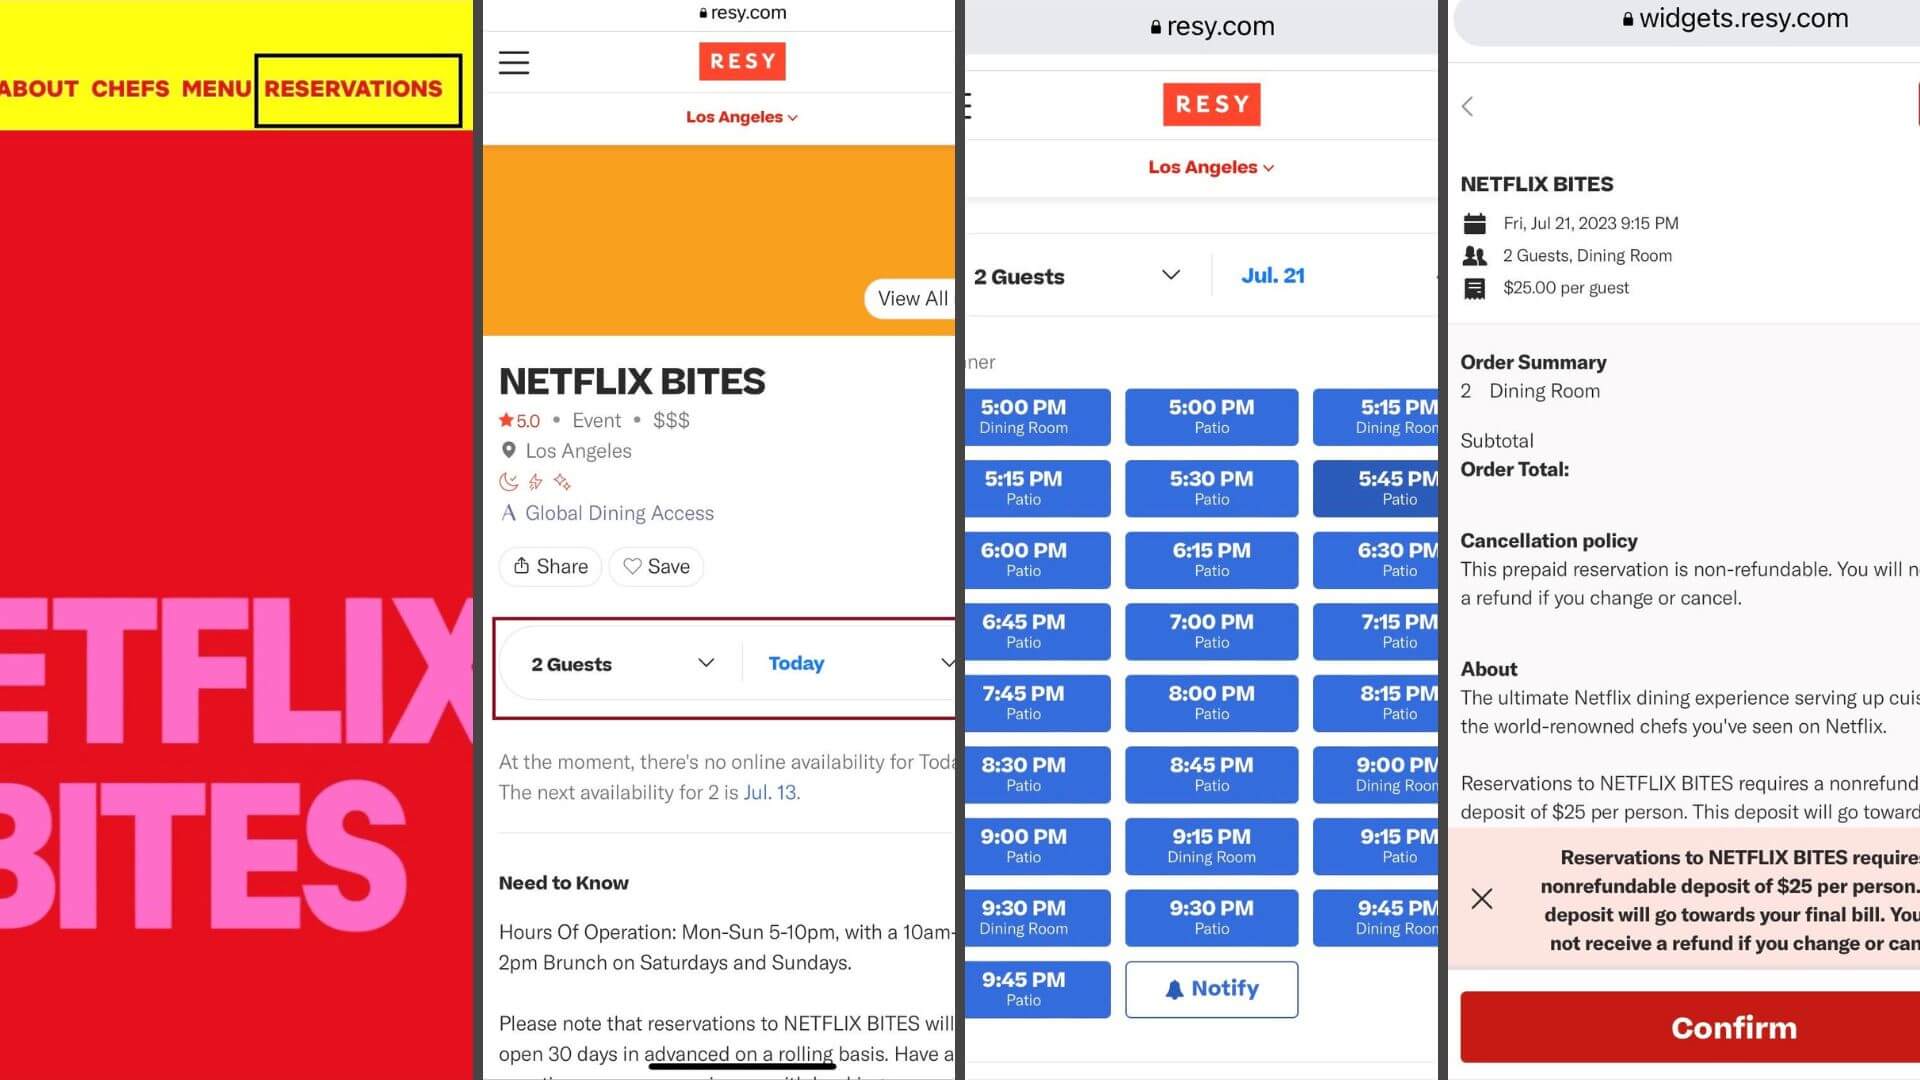 Steps Required to do a reservation for Netflix Bites using Netflix/shop website redirecting to Resy